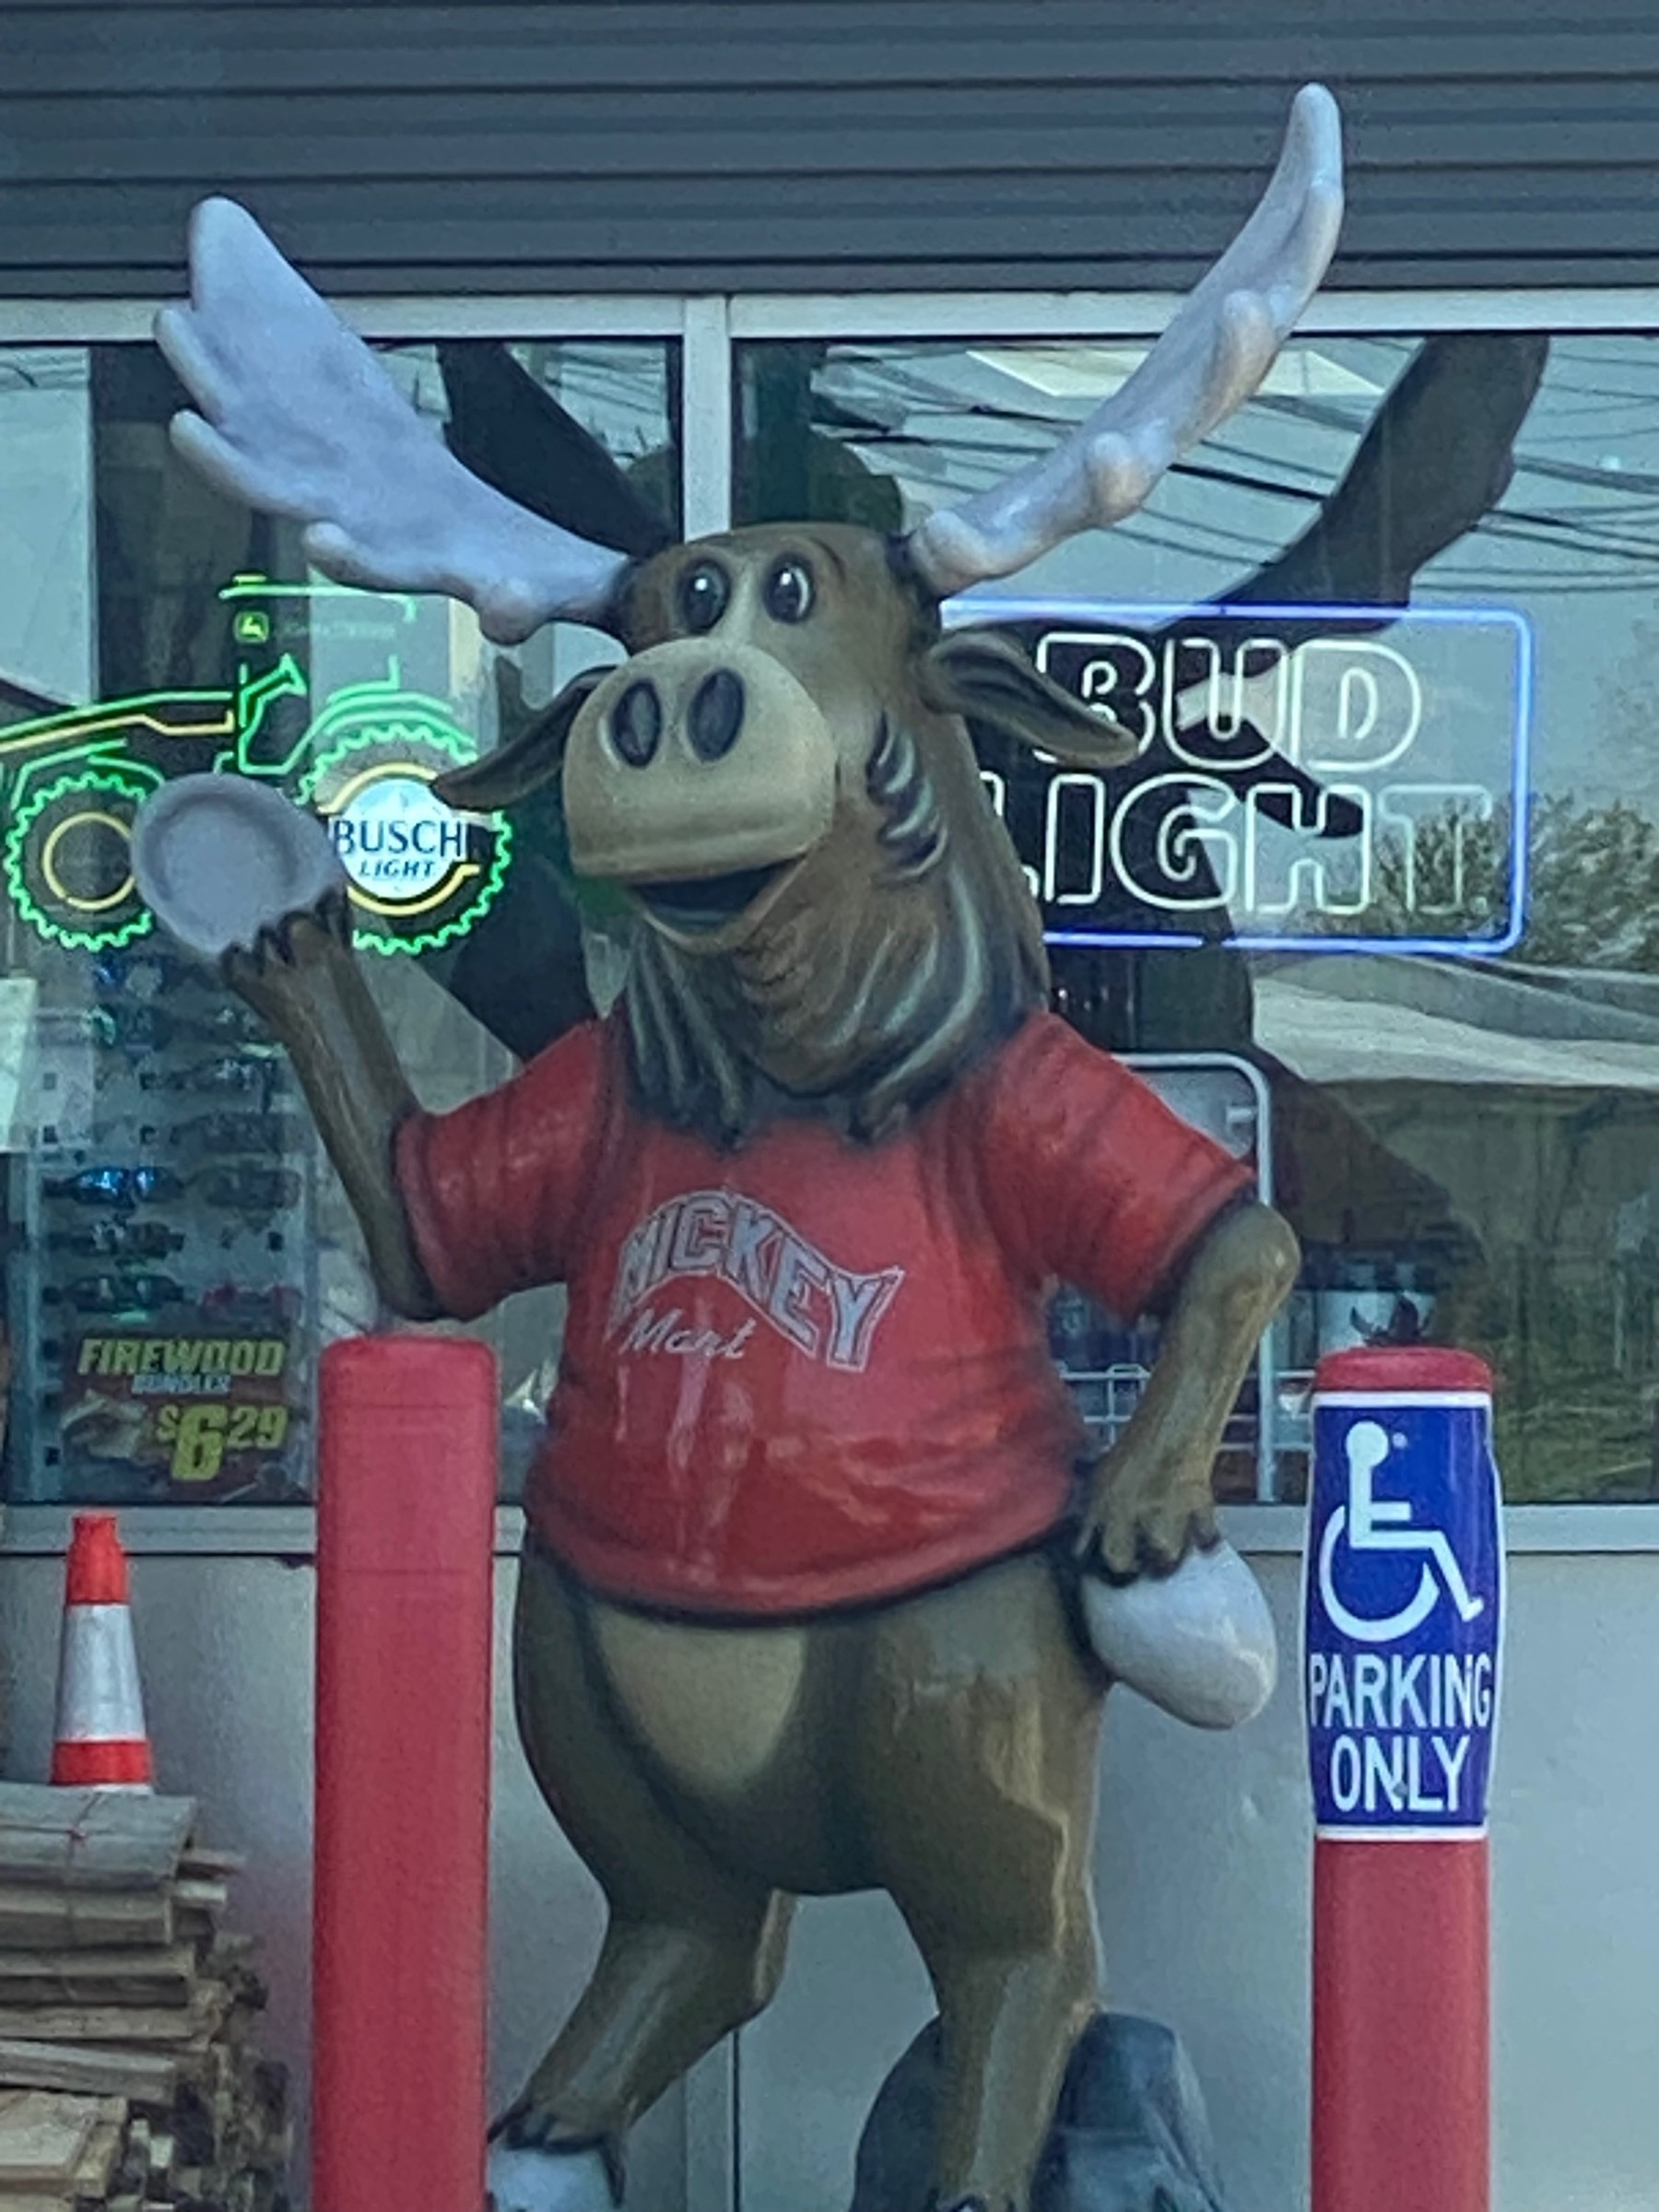 An anthromorphized moose statue in a red sweater smiling and waving outside of a gas station.